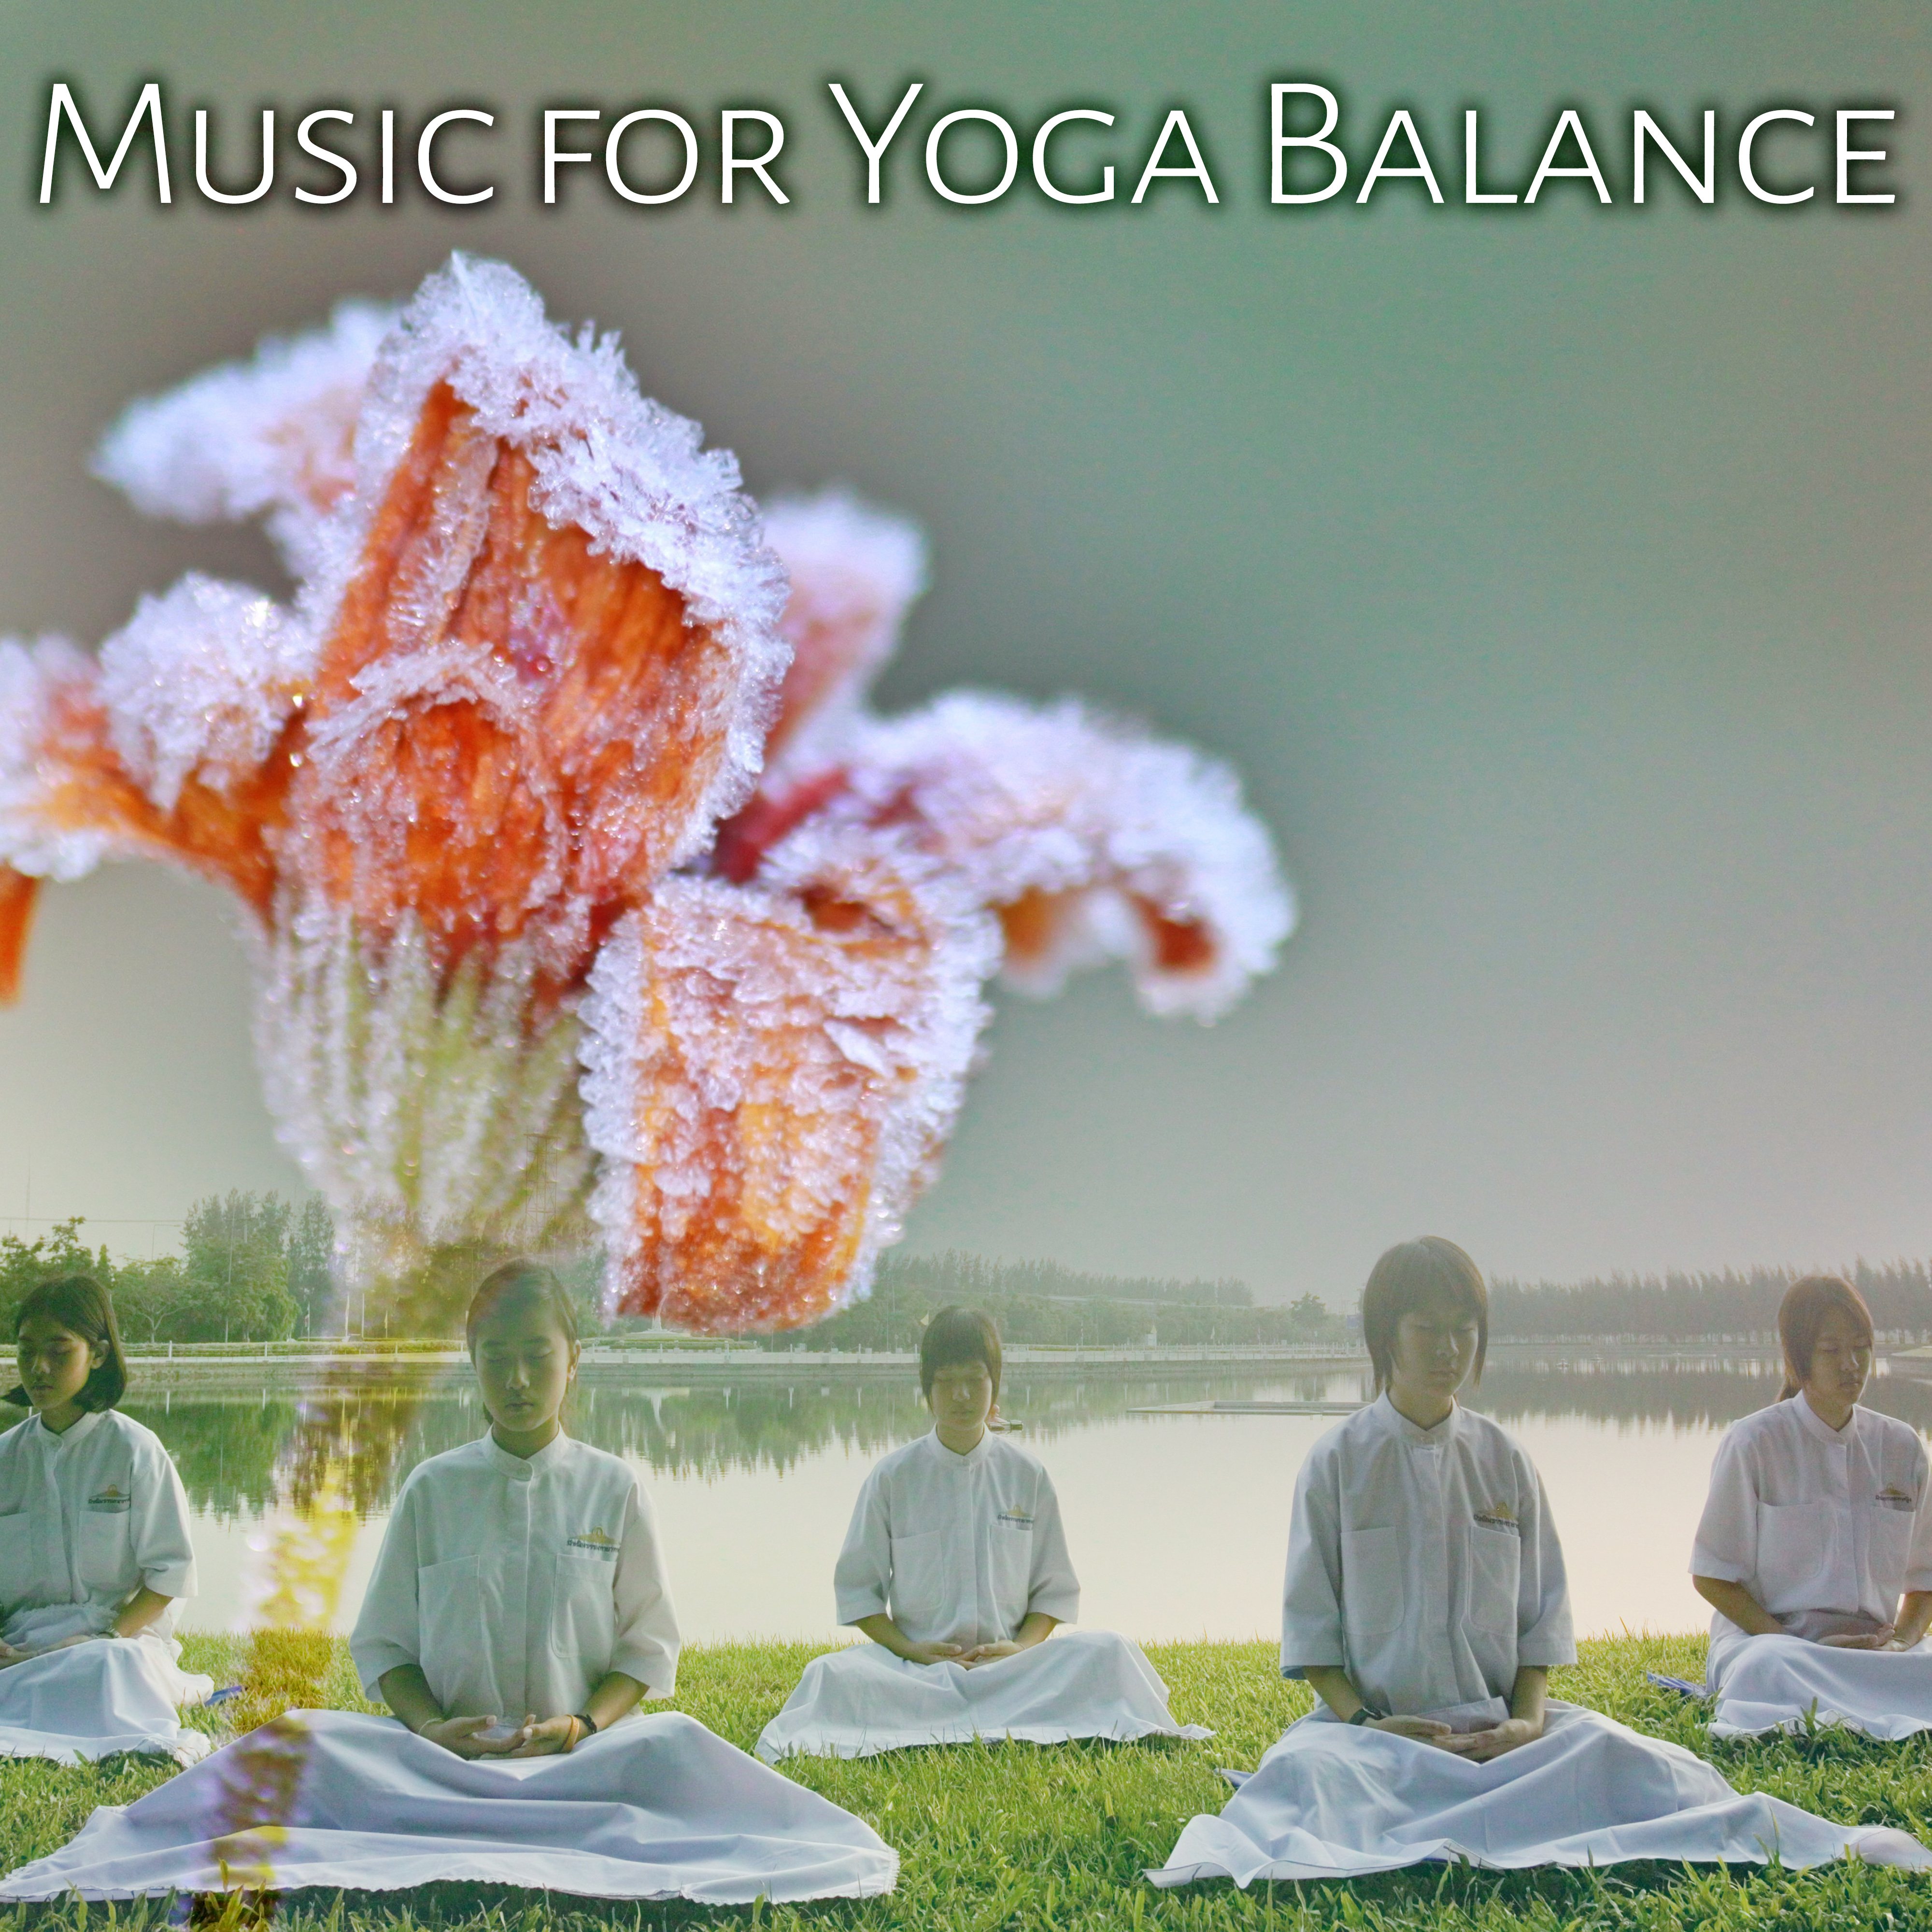 Music for Yoga Balance - Deep Relaxation for Meditation, Nature of Sounds, Soothing Instrumental Music, Healing Therapy Sleep